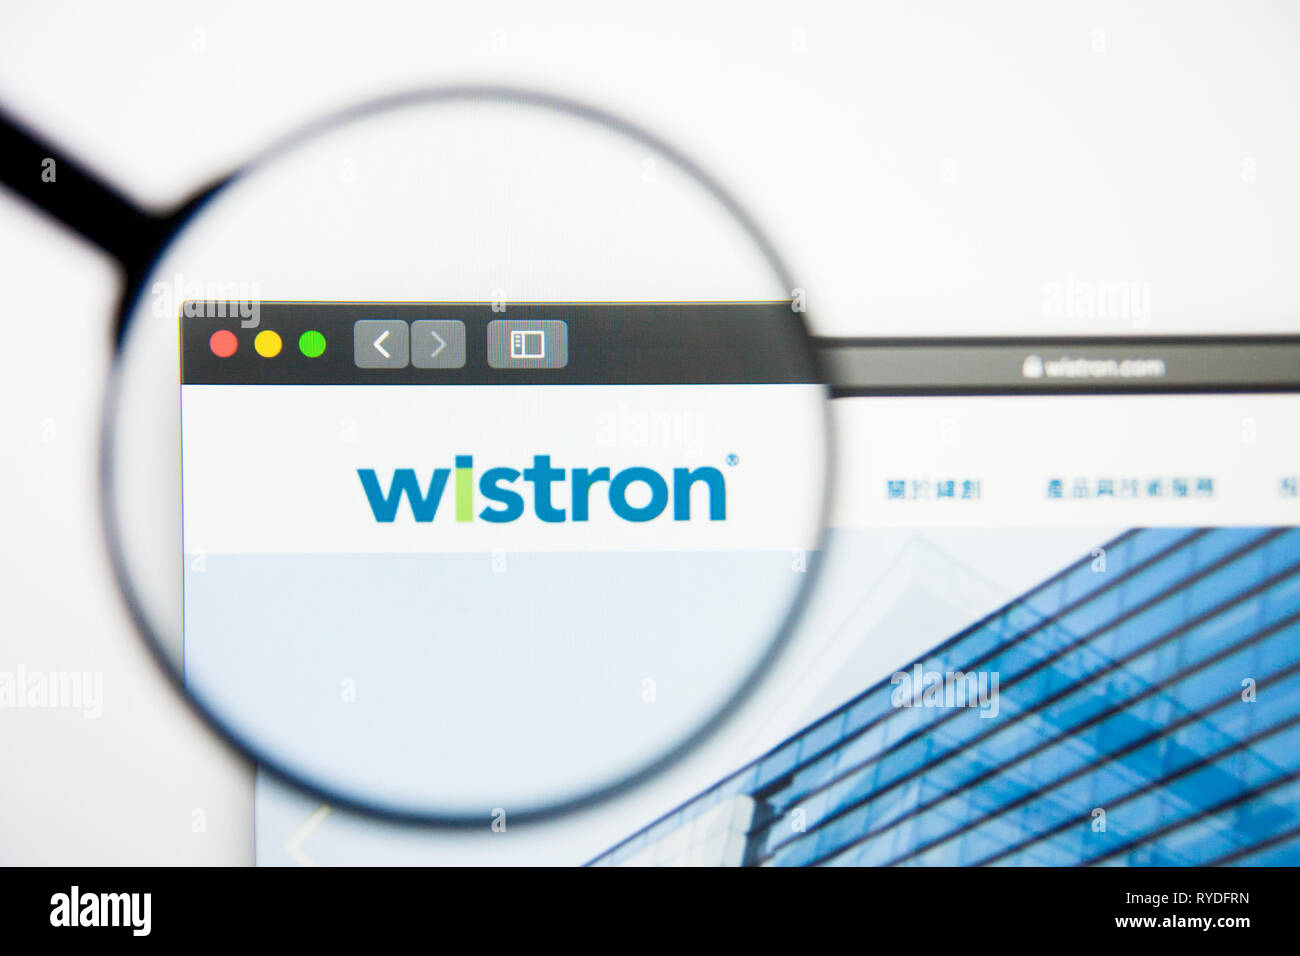 Los Angeles, California, USA - 5 March 2019: Wistron website homepage. Wistron logo visible on display screen, Illustrative Editorial Stock Photo